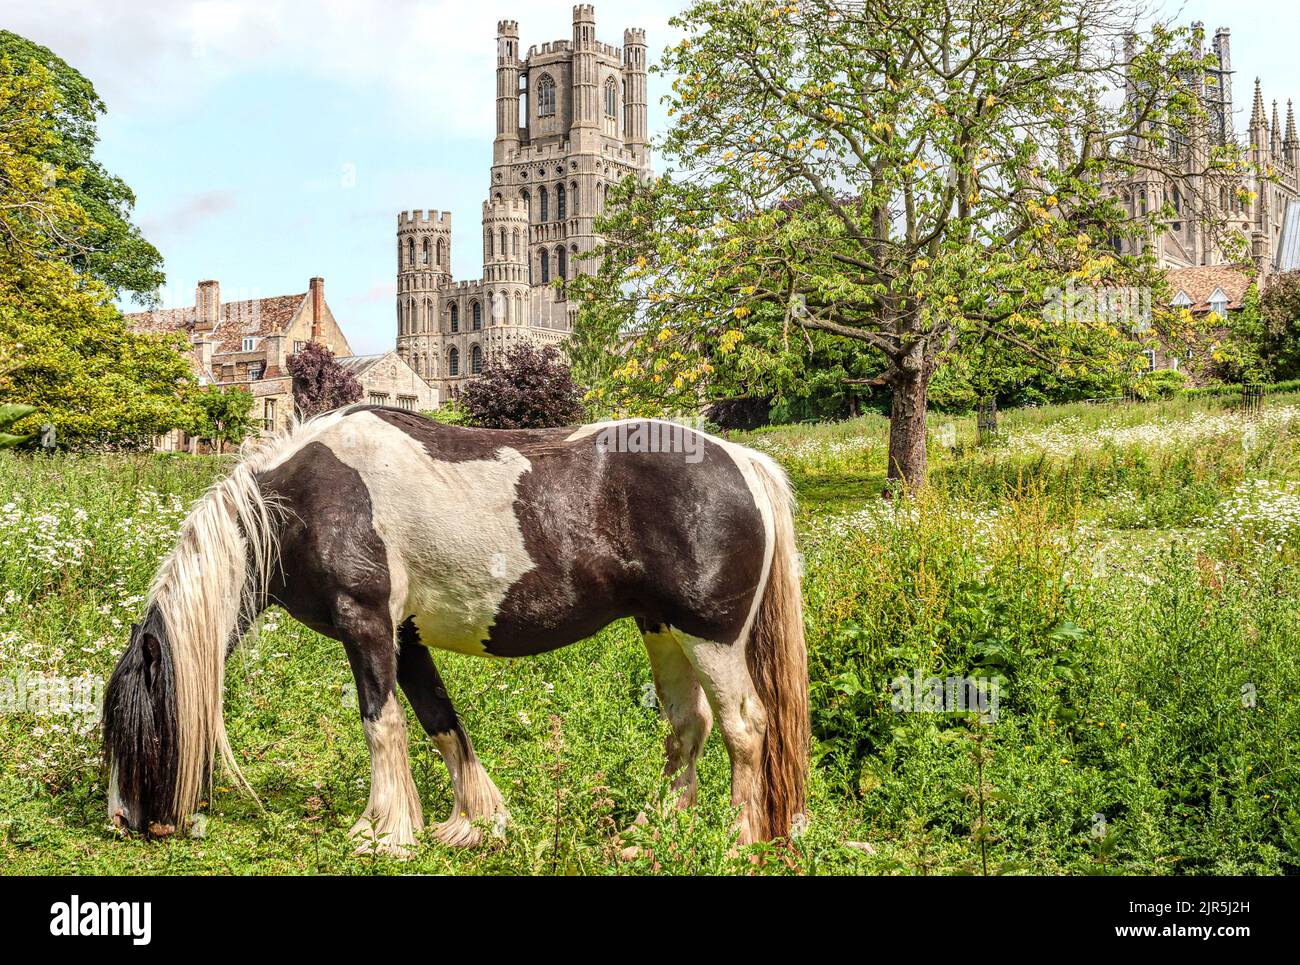 Skewbald Pony on a meadow with the Ely cathedral in the background, Ely, Cambridgeshire, England Stock Photo